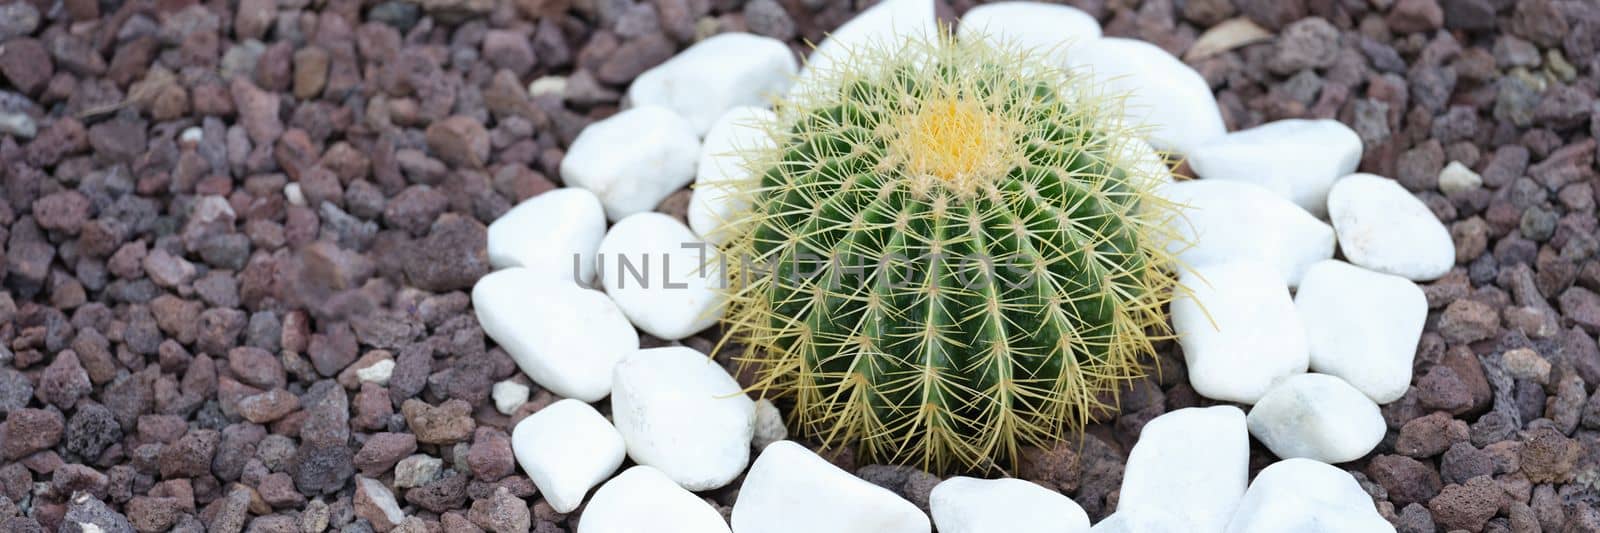 Decorative cactus in the garden between white stones in flower bed by kuprevich